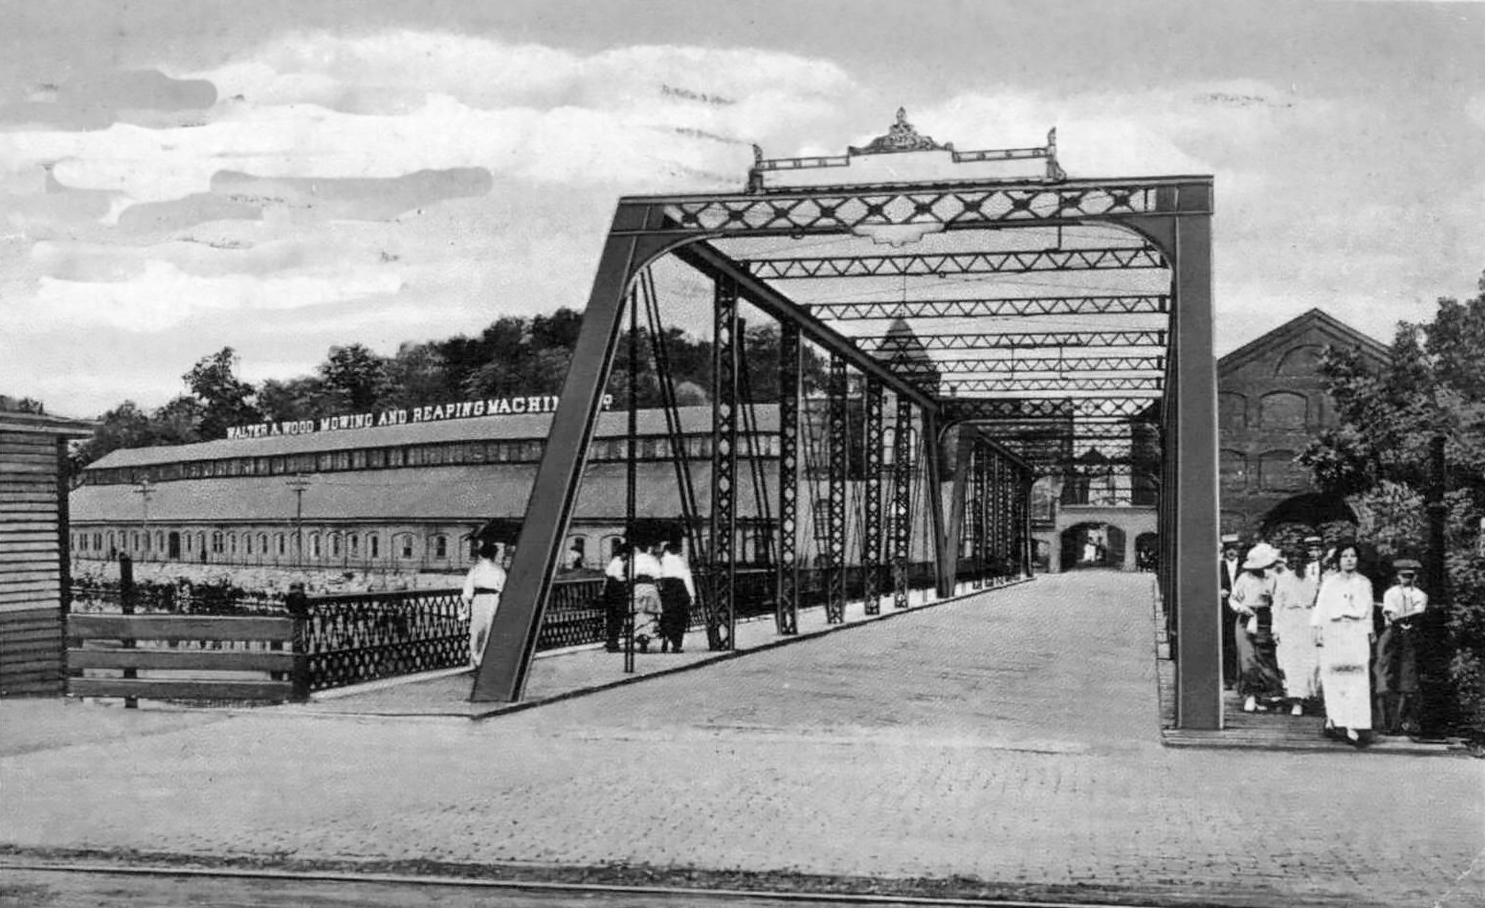 The Shop Bridge In Hoosick Falls NY, Walter A Wood Mower & Reaper Factory In The Background, Rensselaer County c1920.